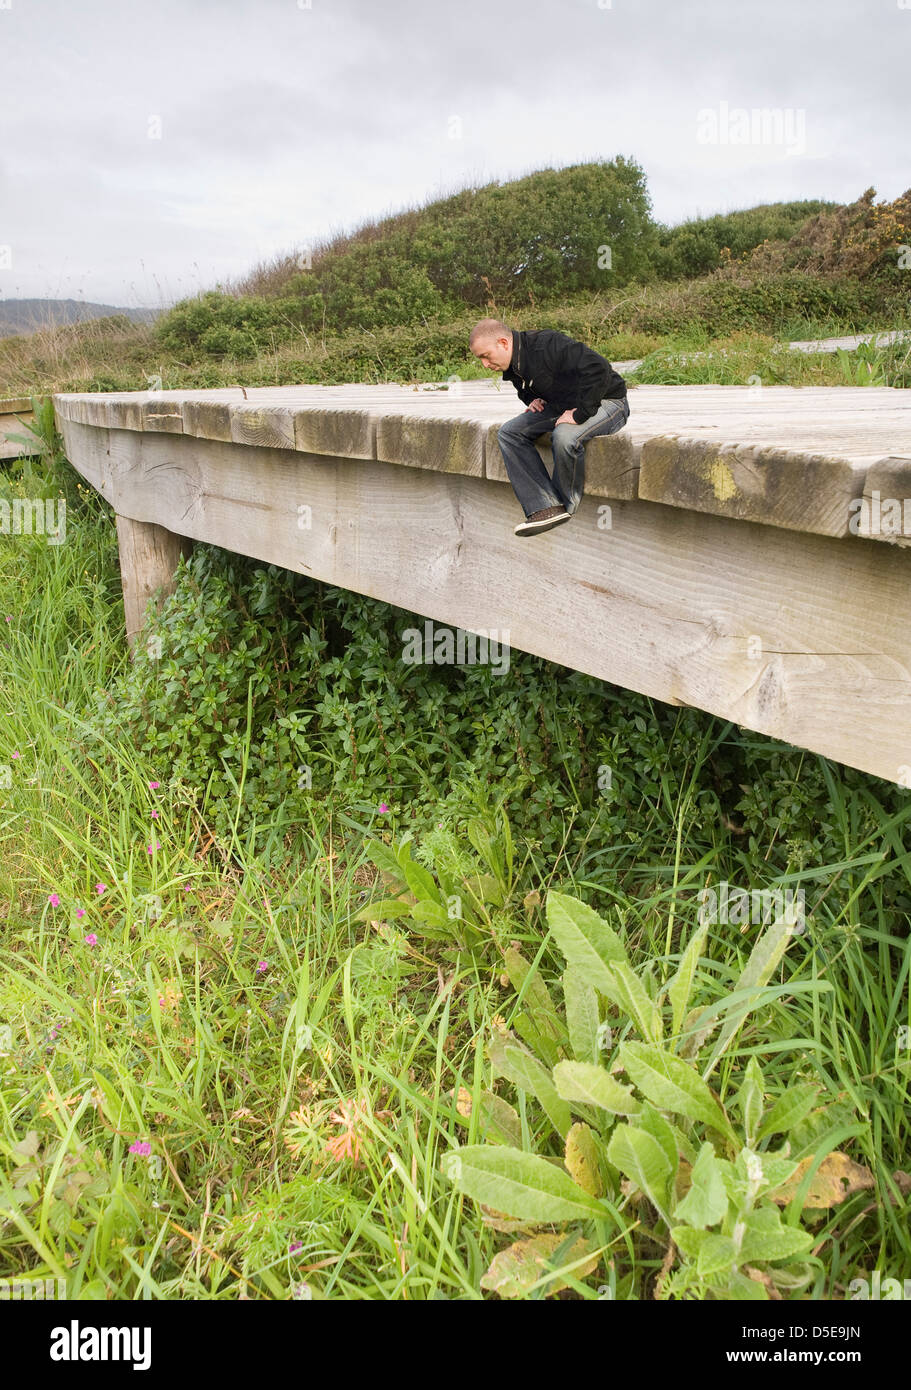 Photomontage of a young man sitting on a wooden walkway in nature and looking down. Man is small compared to the surrounding env Stock Photo